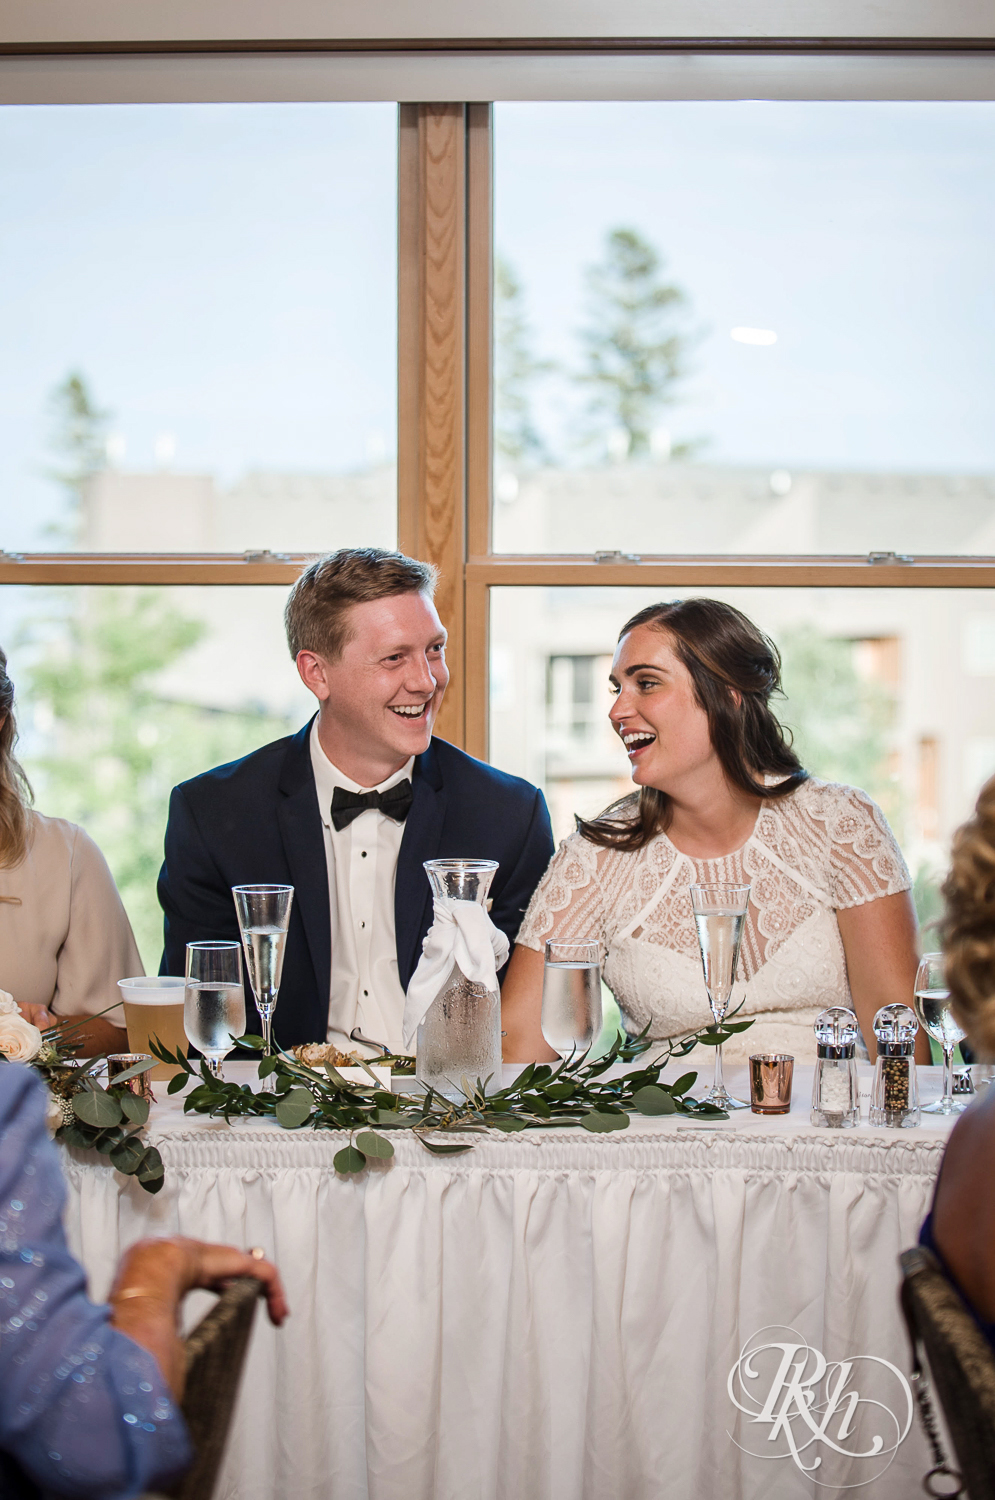 Bride and groom smile during wedding reception during their Bluefin Bay wedding in Tofte, Minnesota.